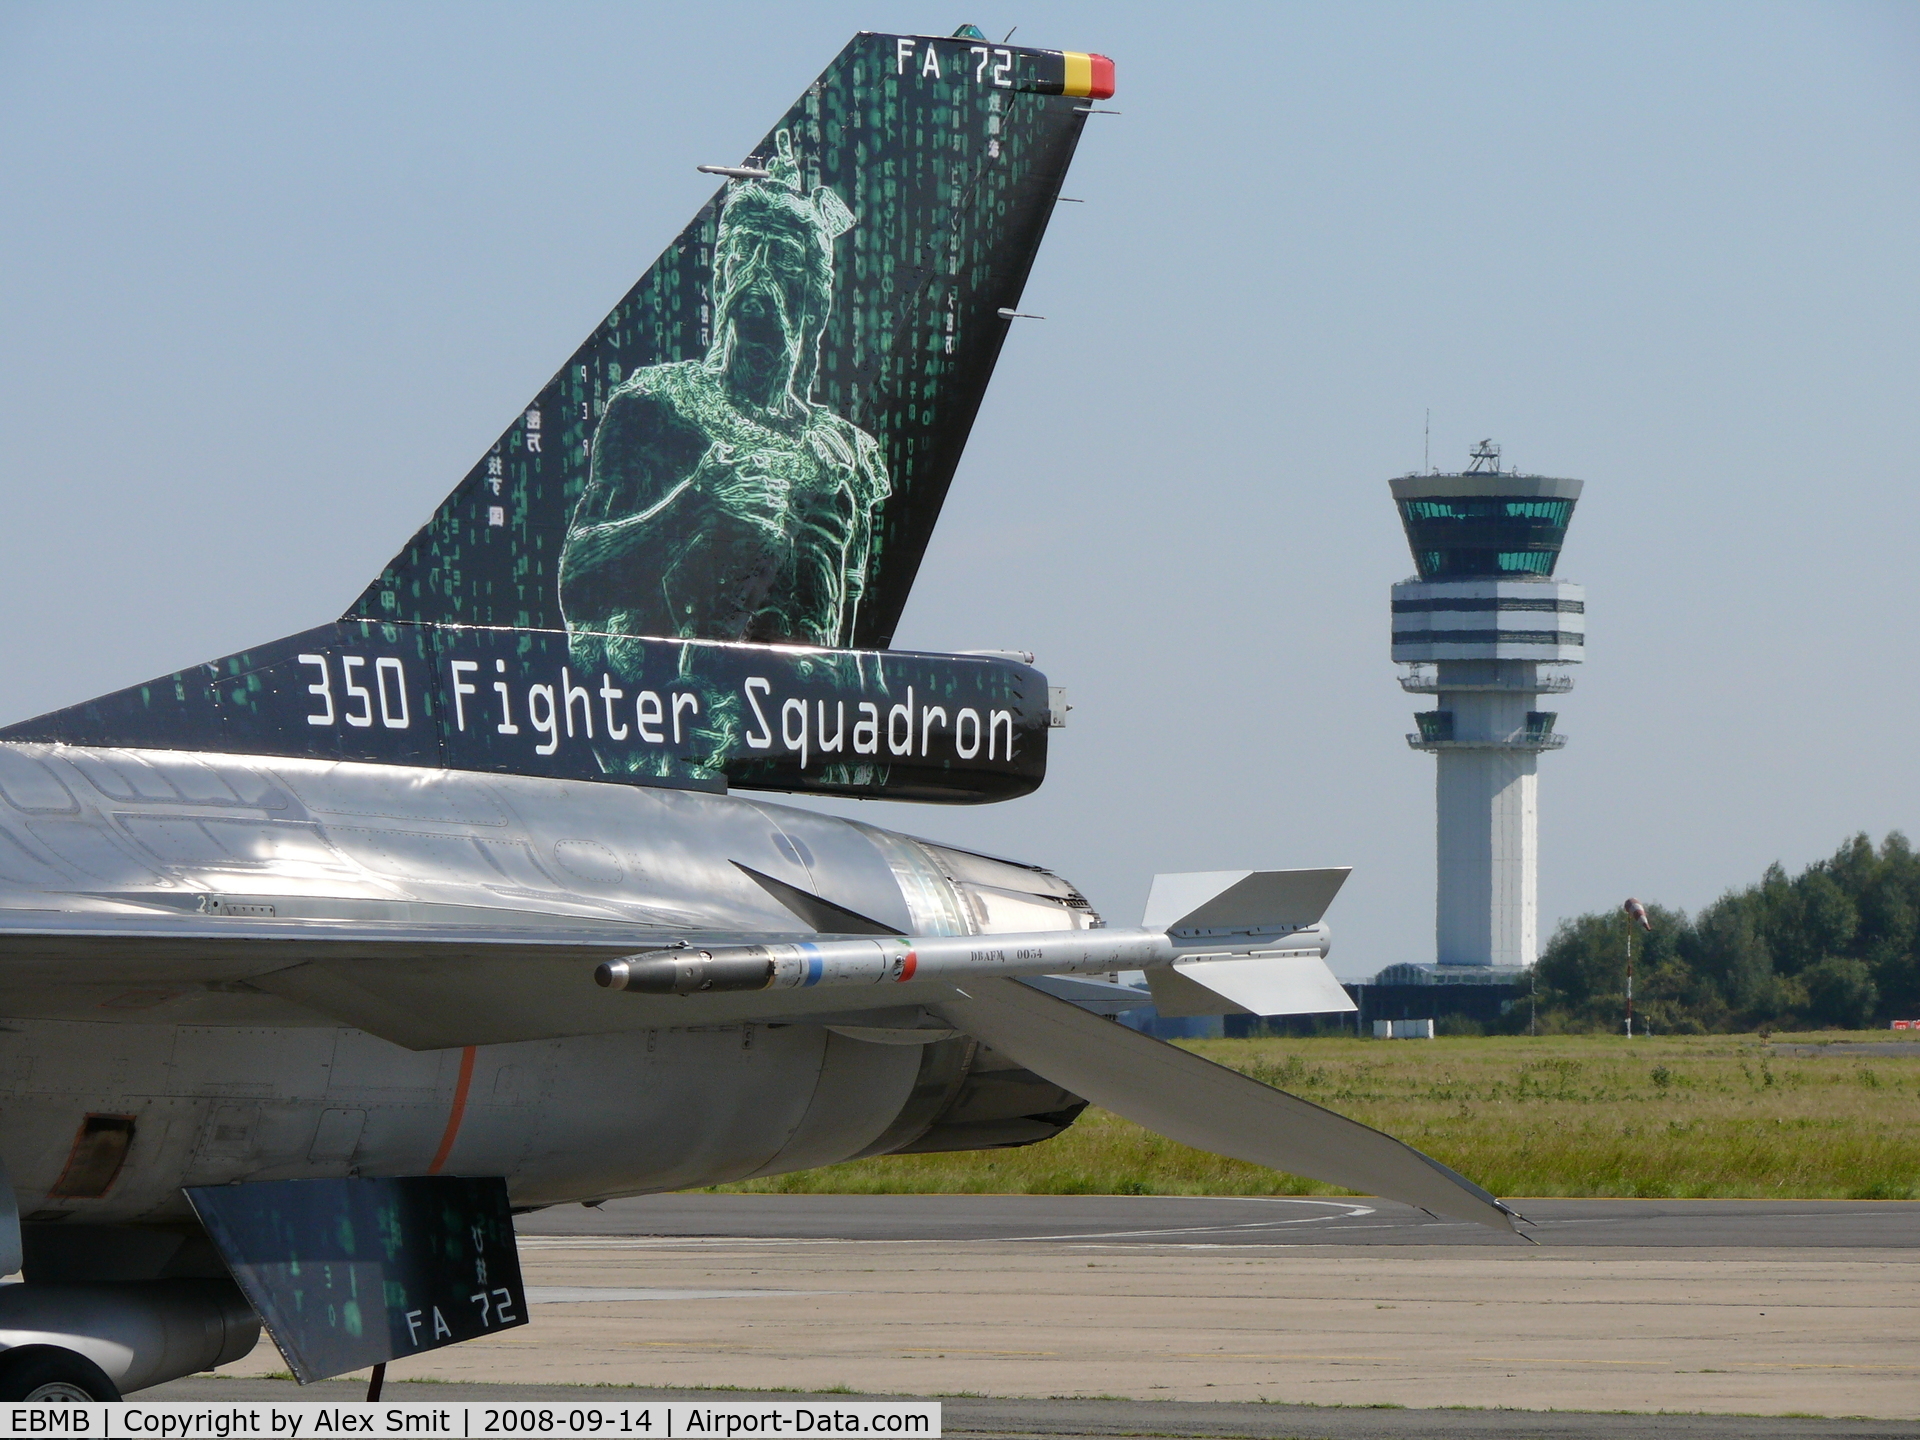 Melsbroek Air Base Airport, Brussels Belgium (EBMB) - Belgian Air Component F-16 'Matrix' with EMBM/EBBR tower in the background